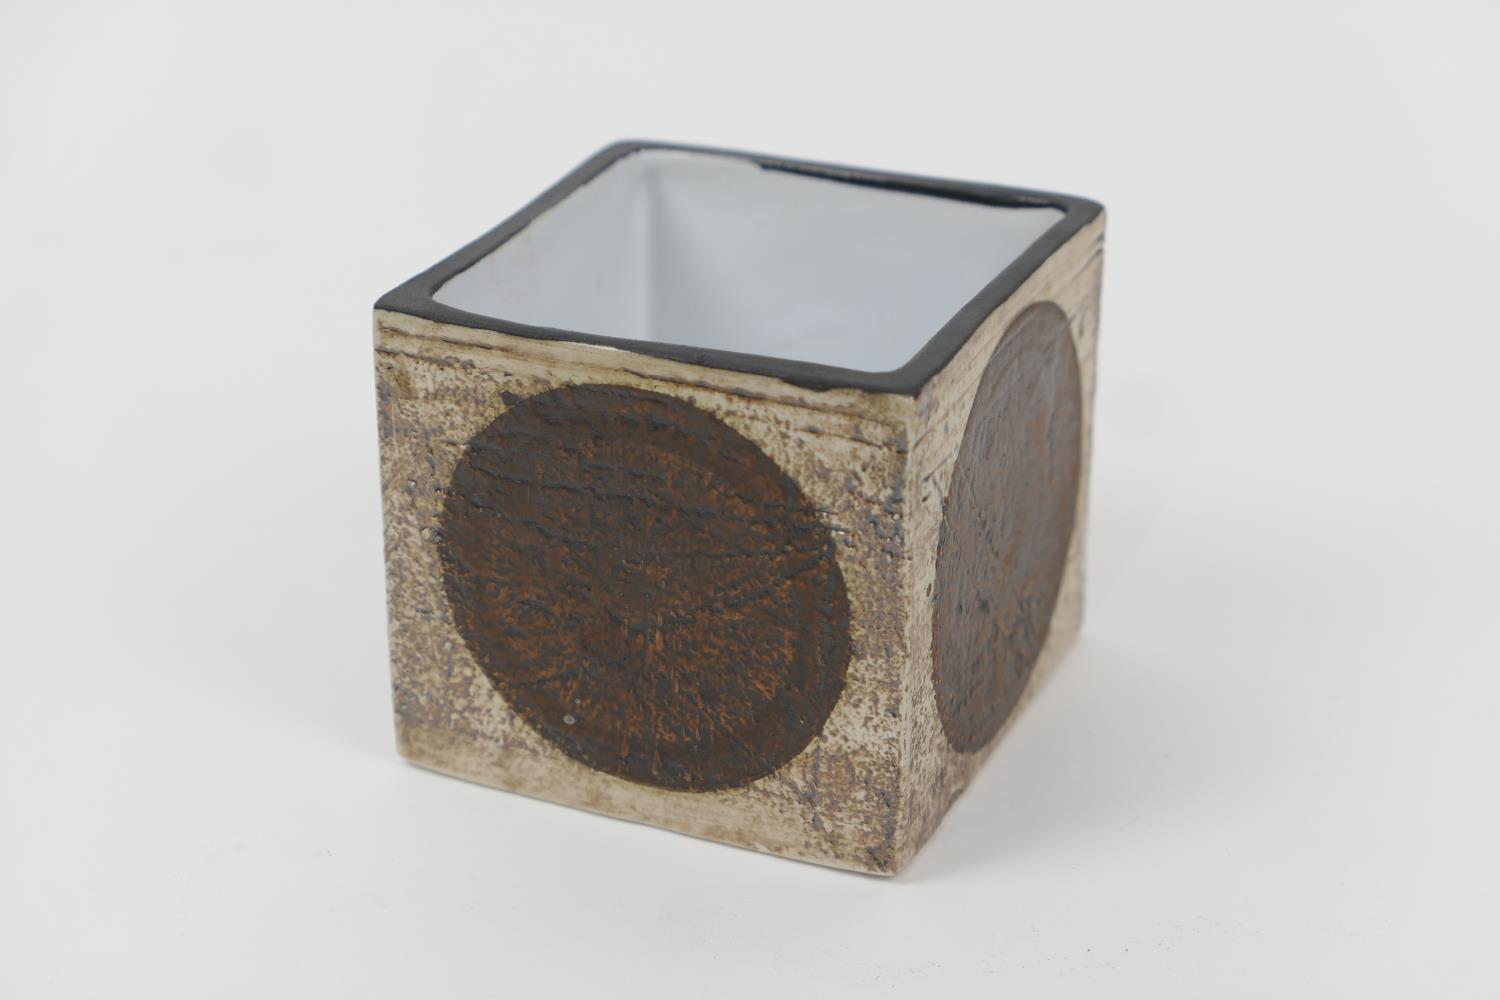 Troika cube vase, decorated with four brown discs in a textured finish against a buff brown